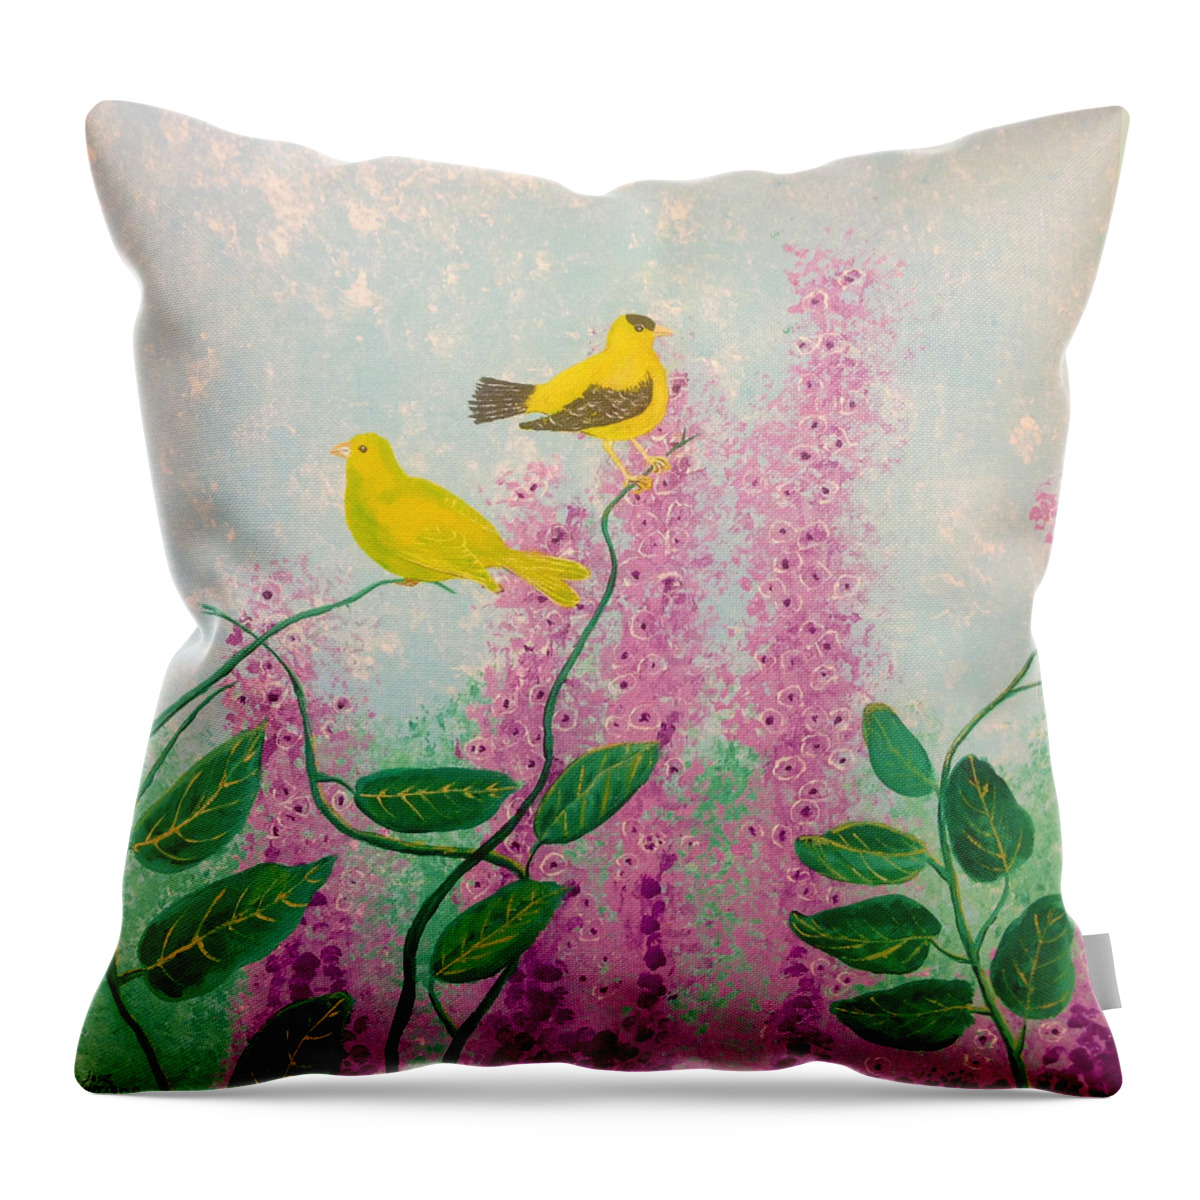 Birds Throw Pillow featuring the painting Birds by Martin Valeriano